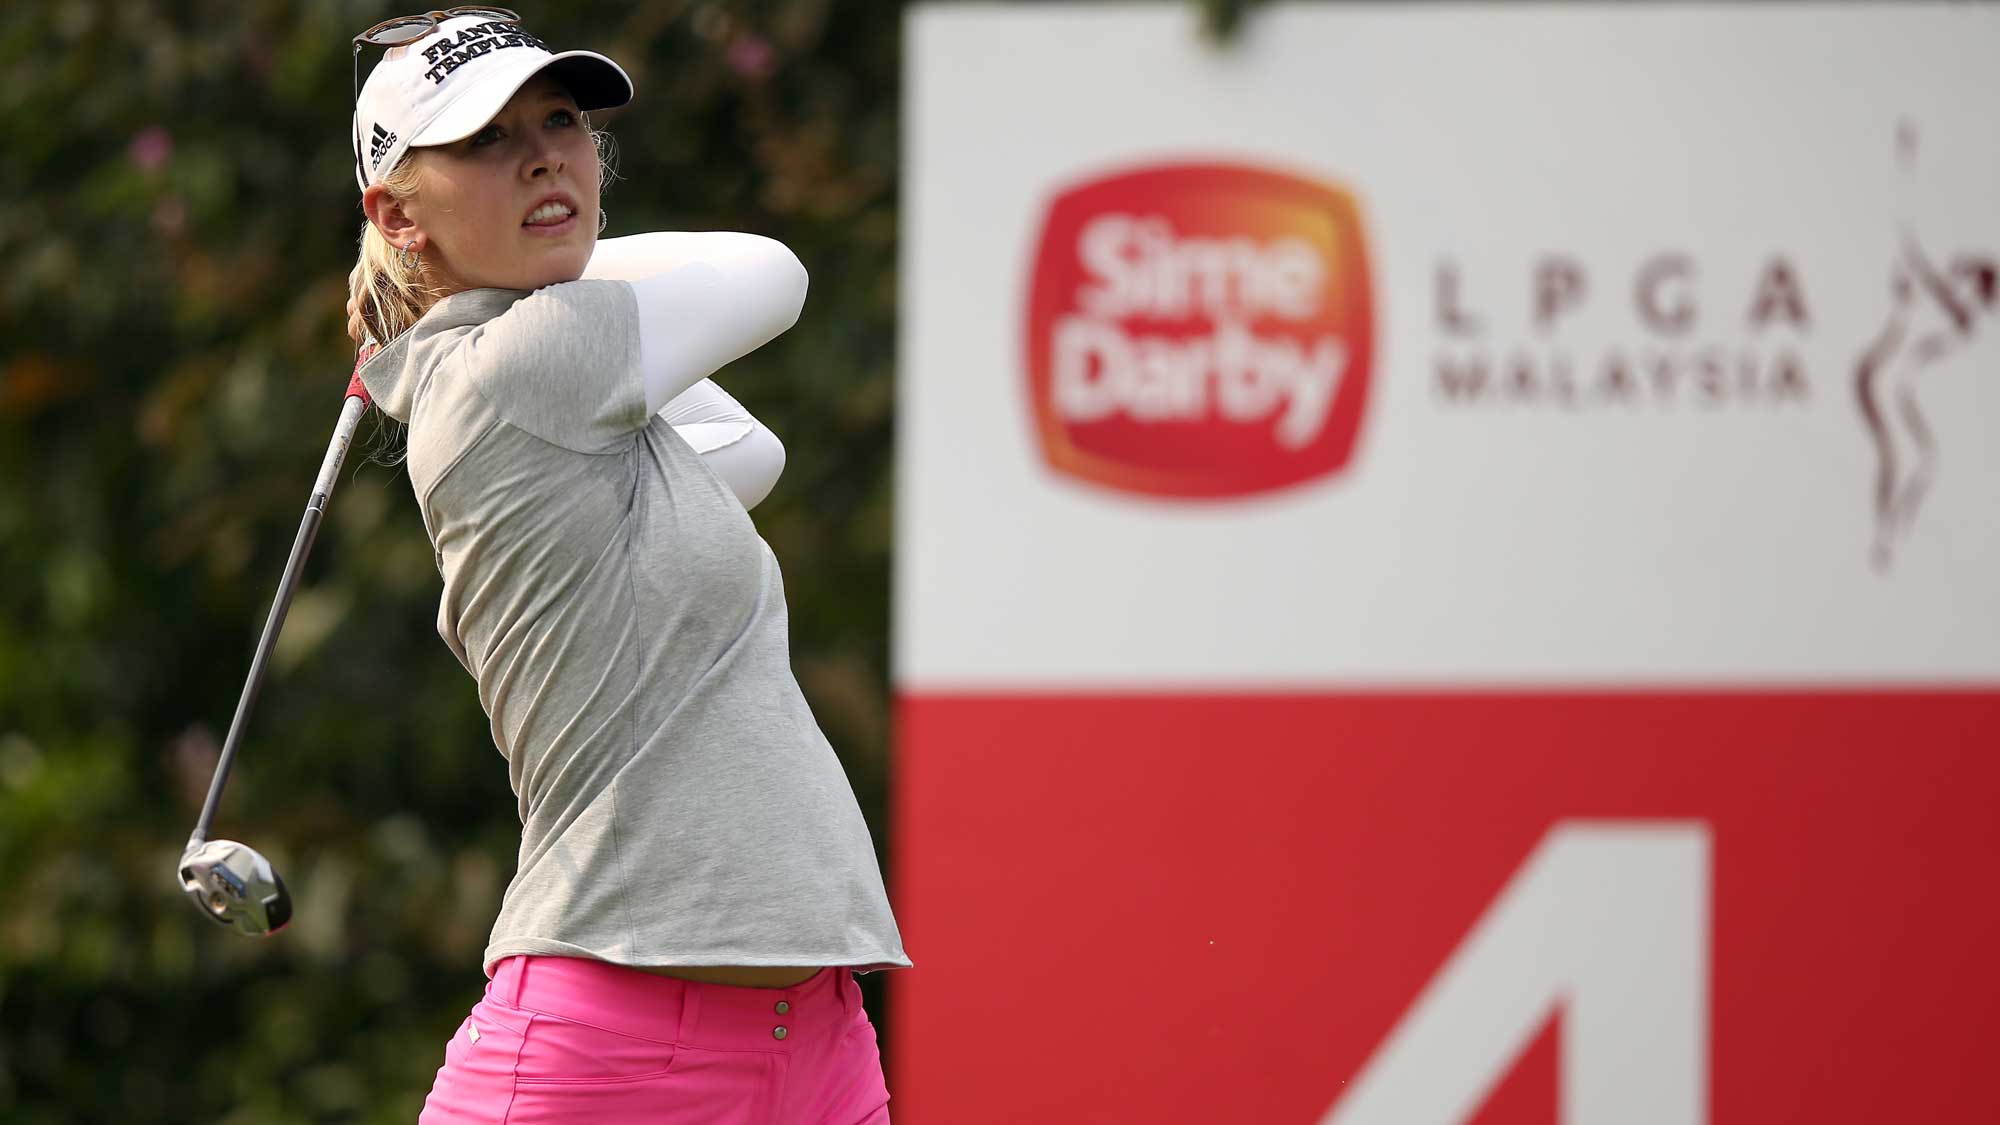 Jessica Korda of USA watches her tee shot on the 4th hole during round three of the Sime Darby LPGA Tour at Kuala Lumpur Golf & Country Club